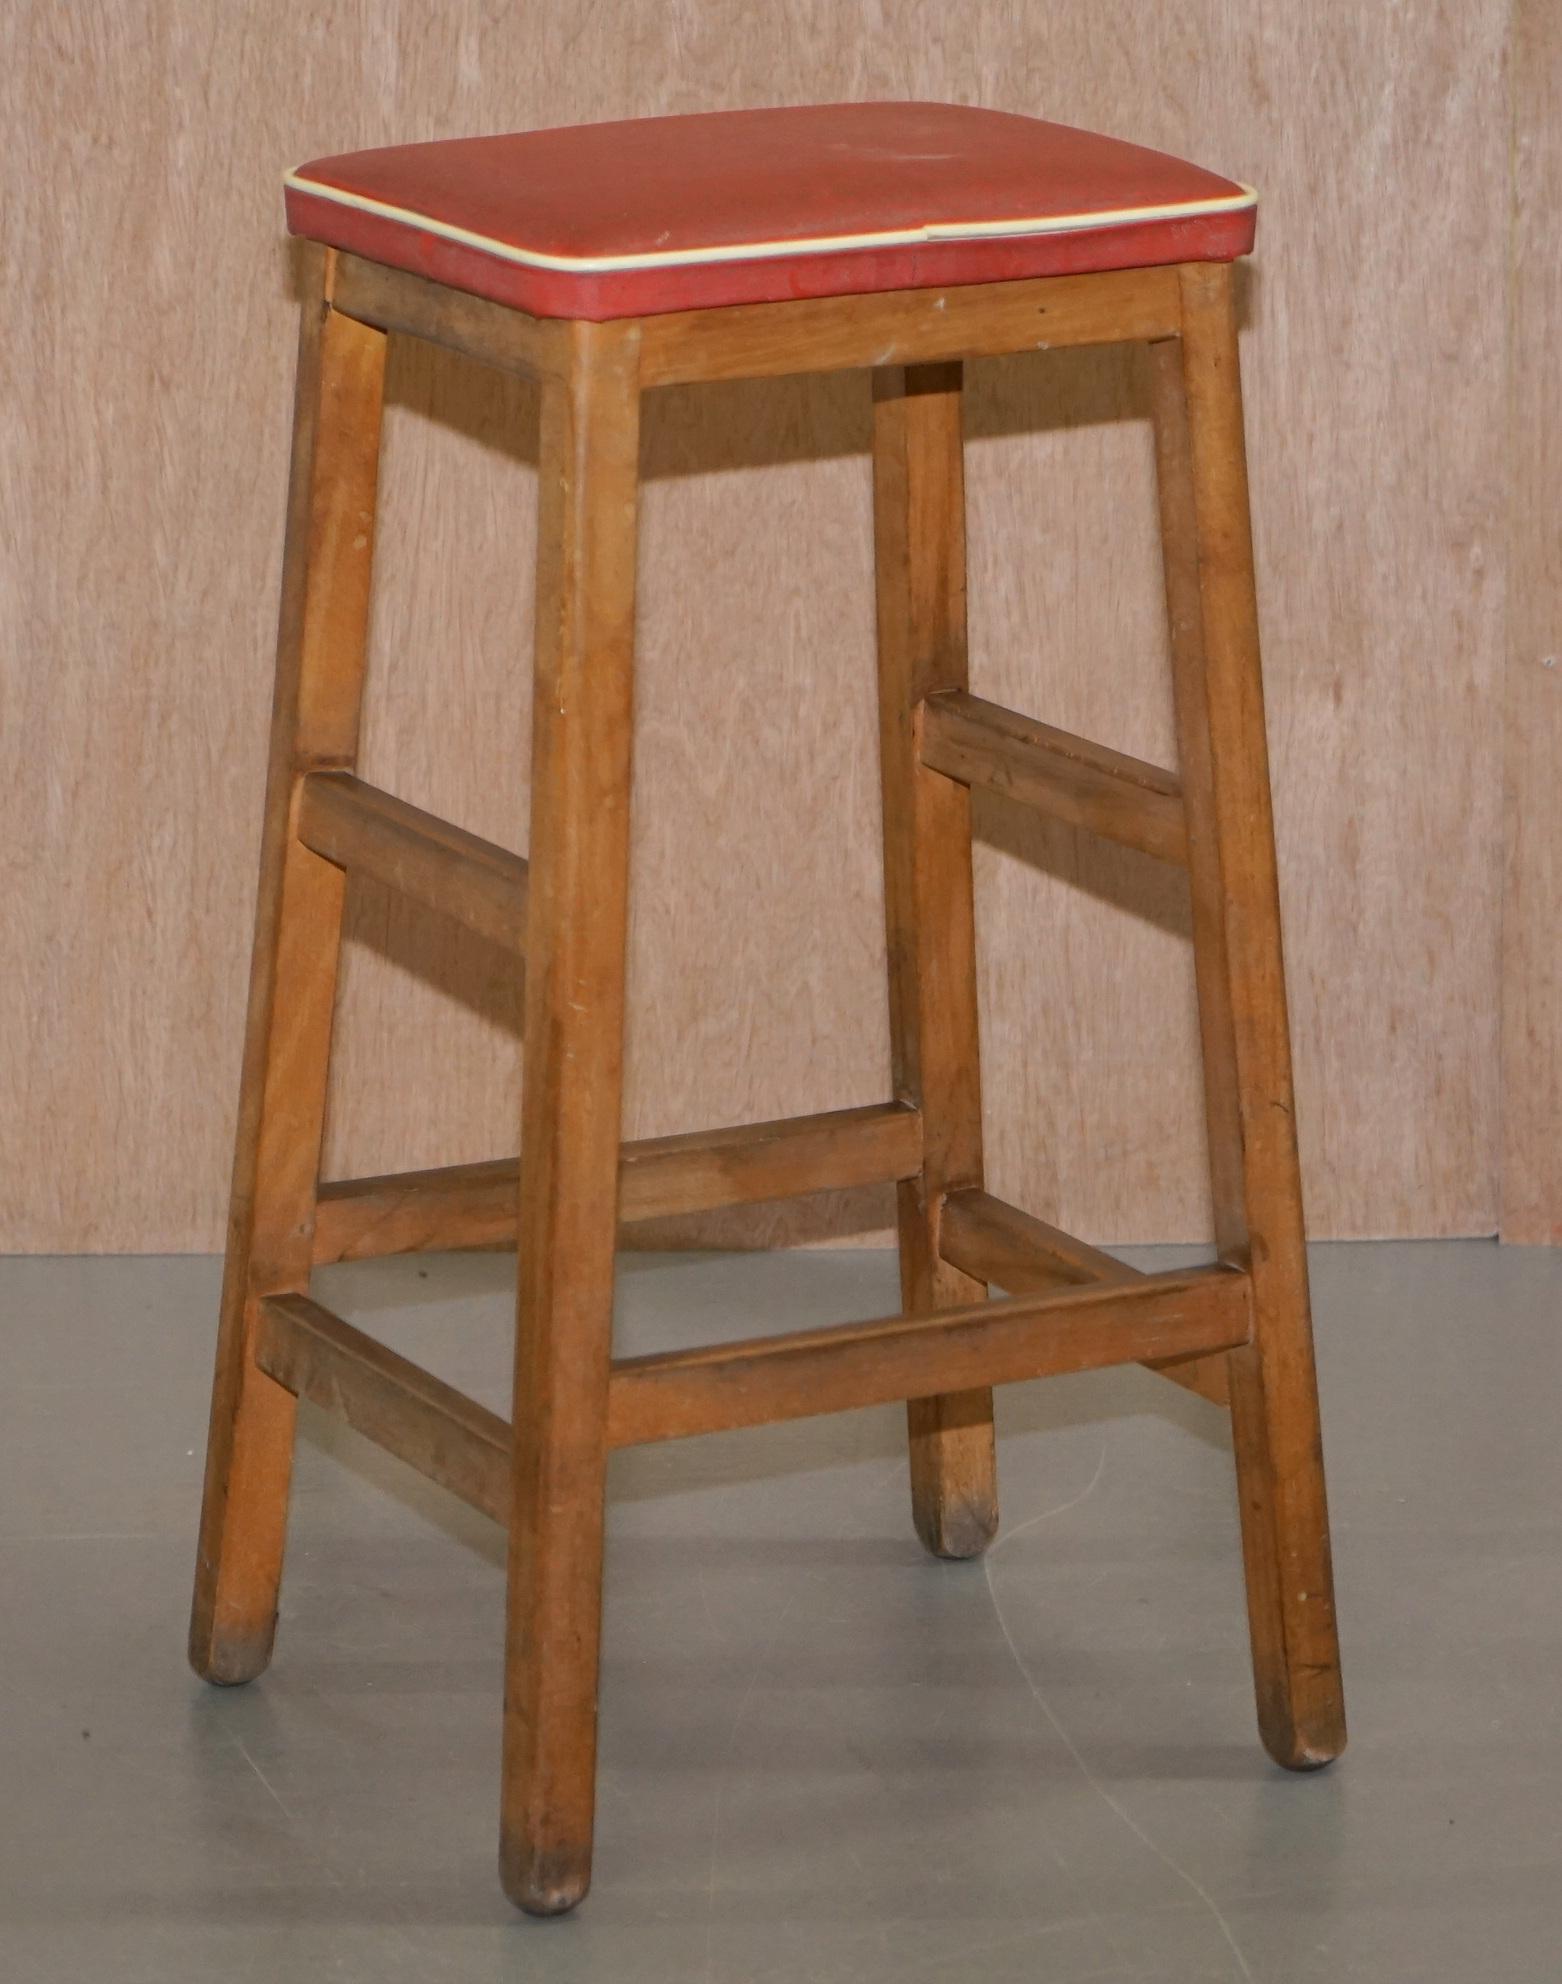 We are delighted to offer for sale this lovely suite of three progress vintage kitchen stools one stamped Modern Industries Product

These are a lovely decorative set of midcentury oak stools, they came from and Art School and have decades of